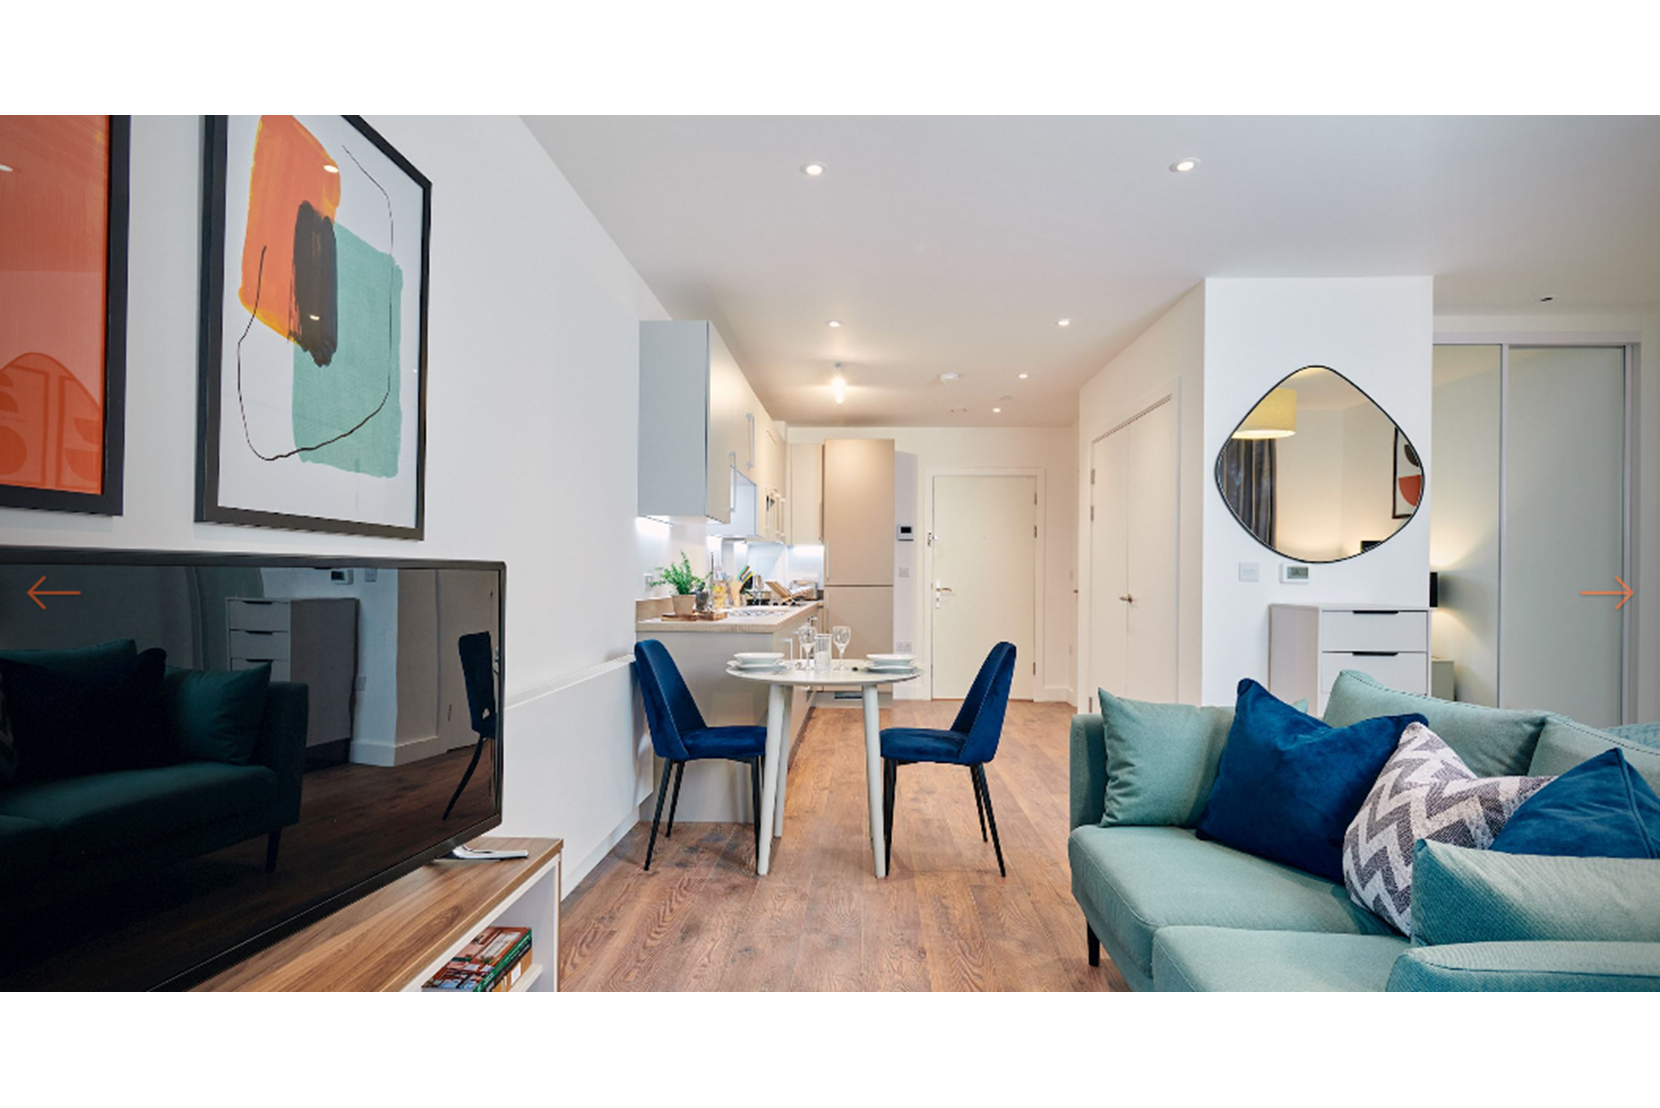 Apartment-APO-Group-Barking-Greater-London-internal-kitchen-dining-living-area